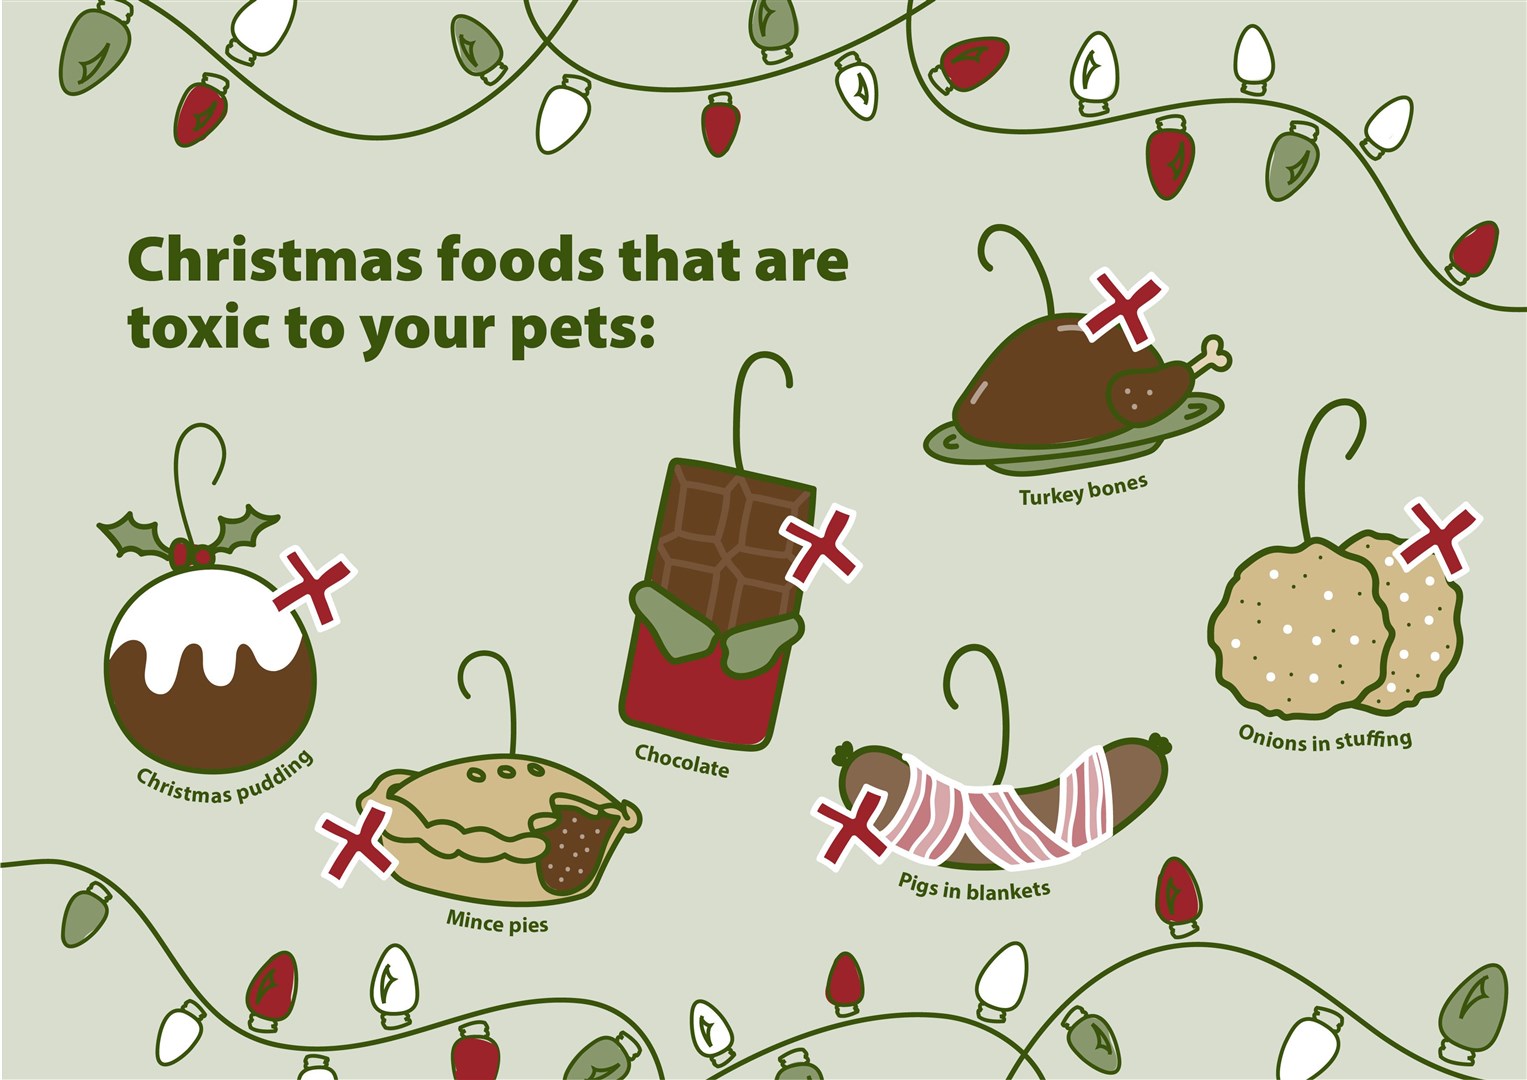 Many festive food favourites can spell trouble for pets.